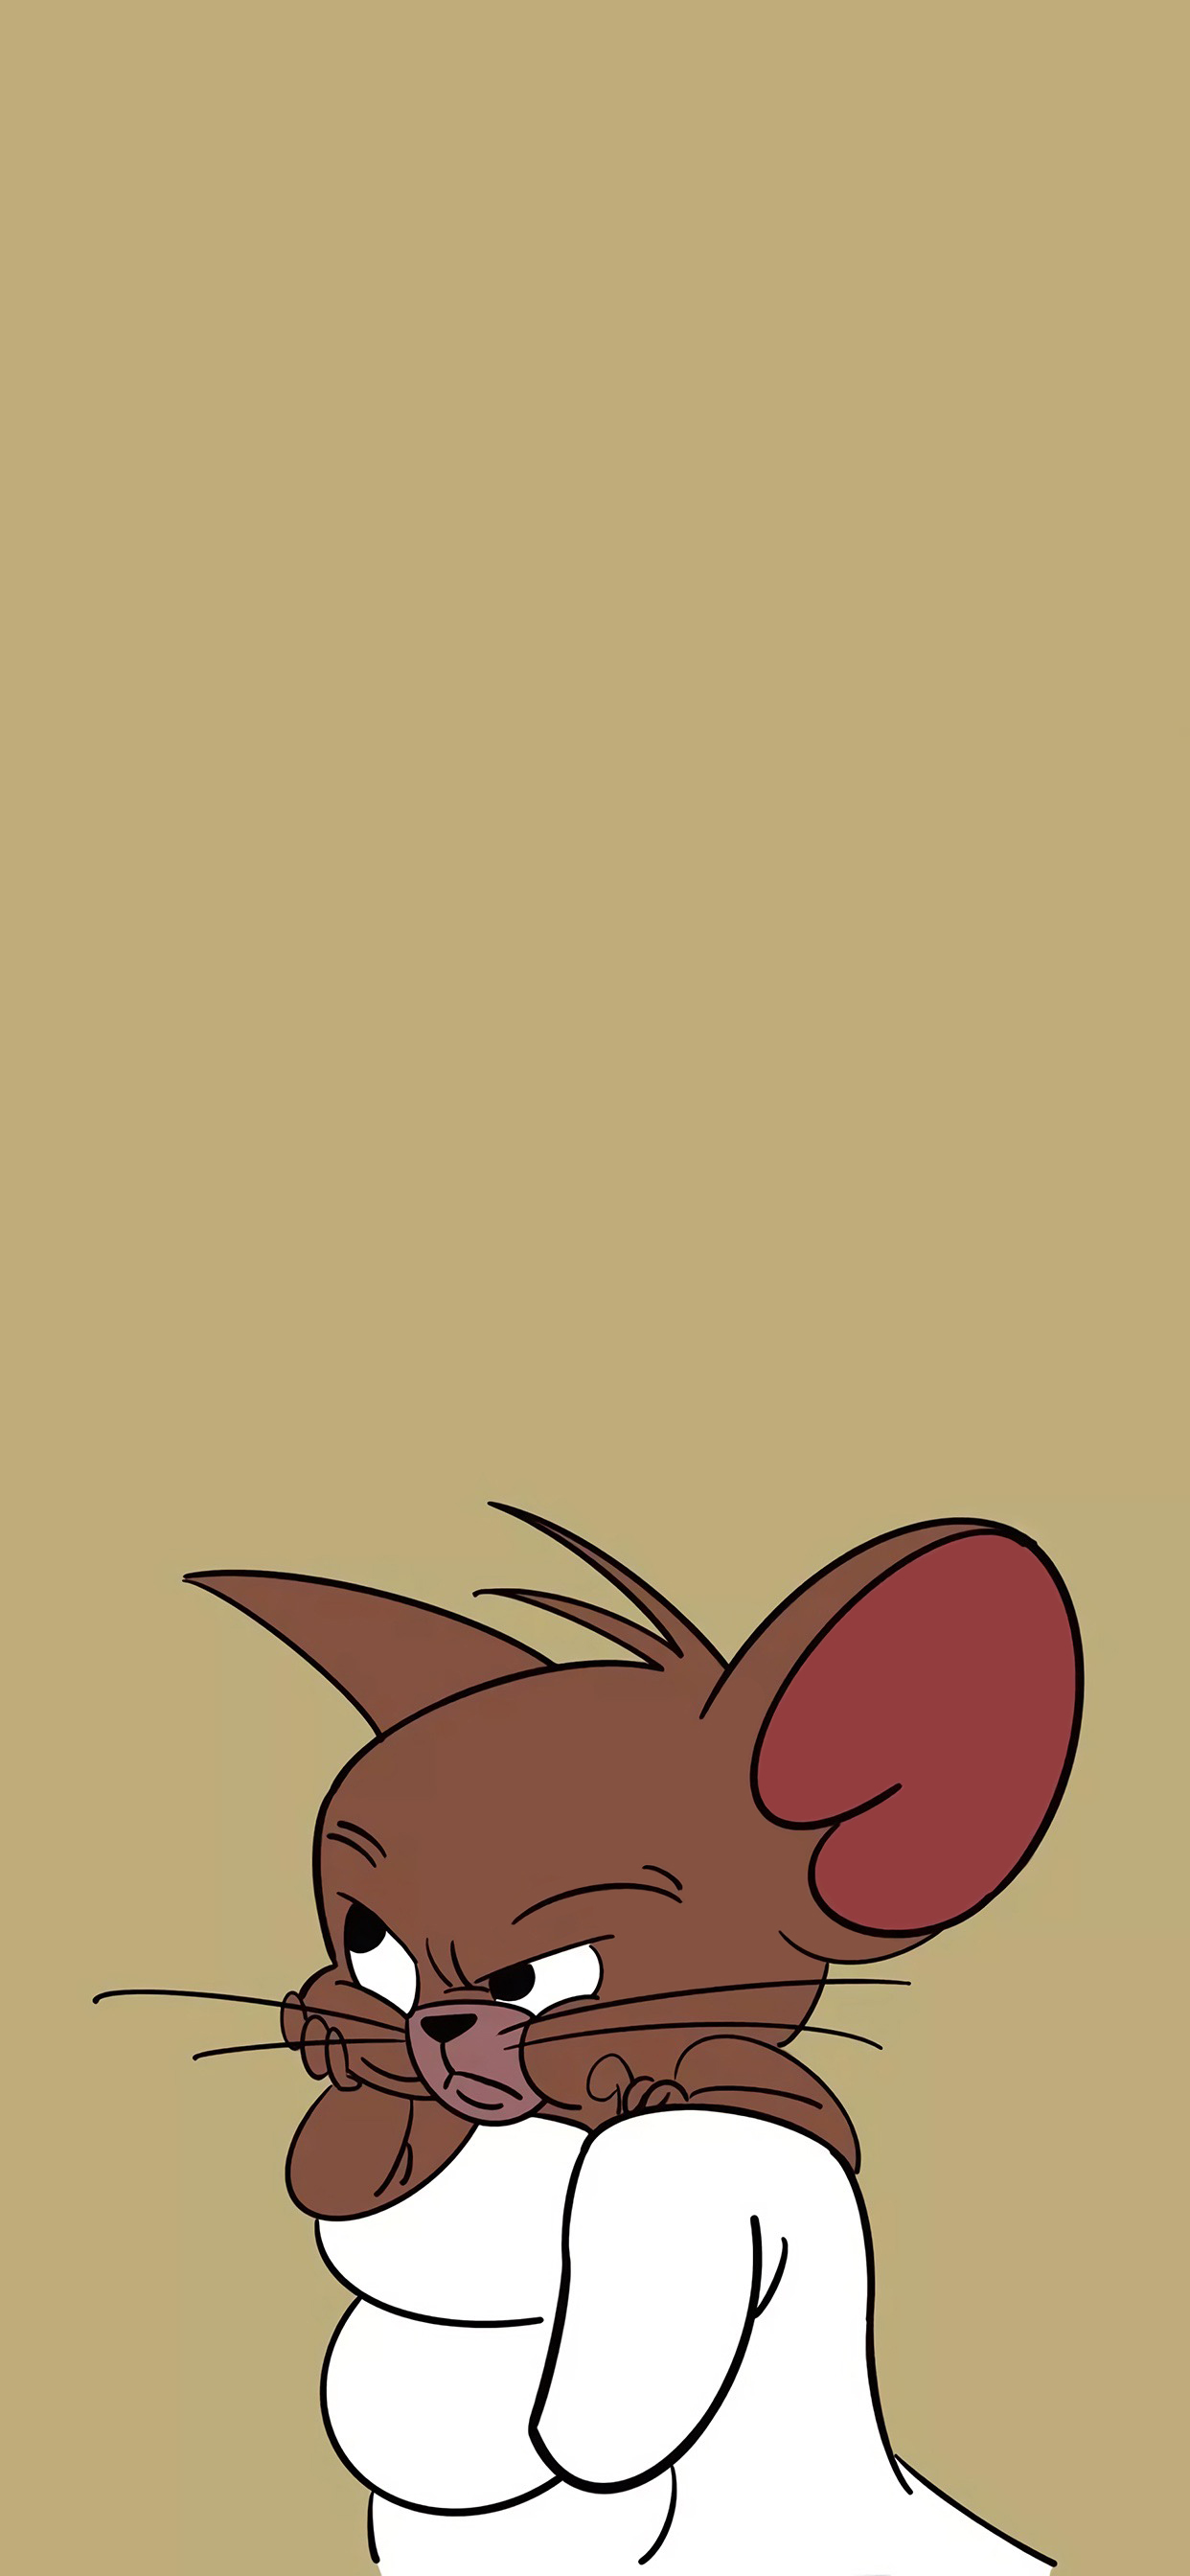 Tap to see more Jerry the mouse from Tom and Jerry iPhone wallpaper! - Tom and Jerry